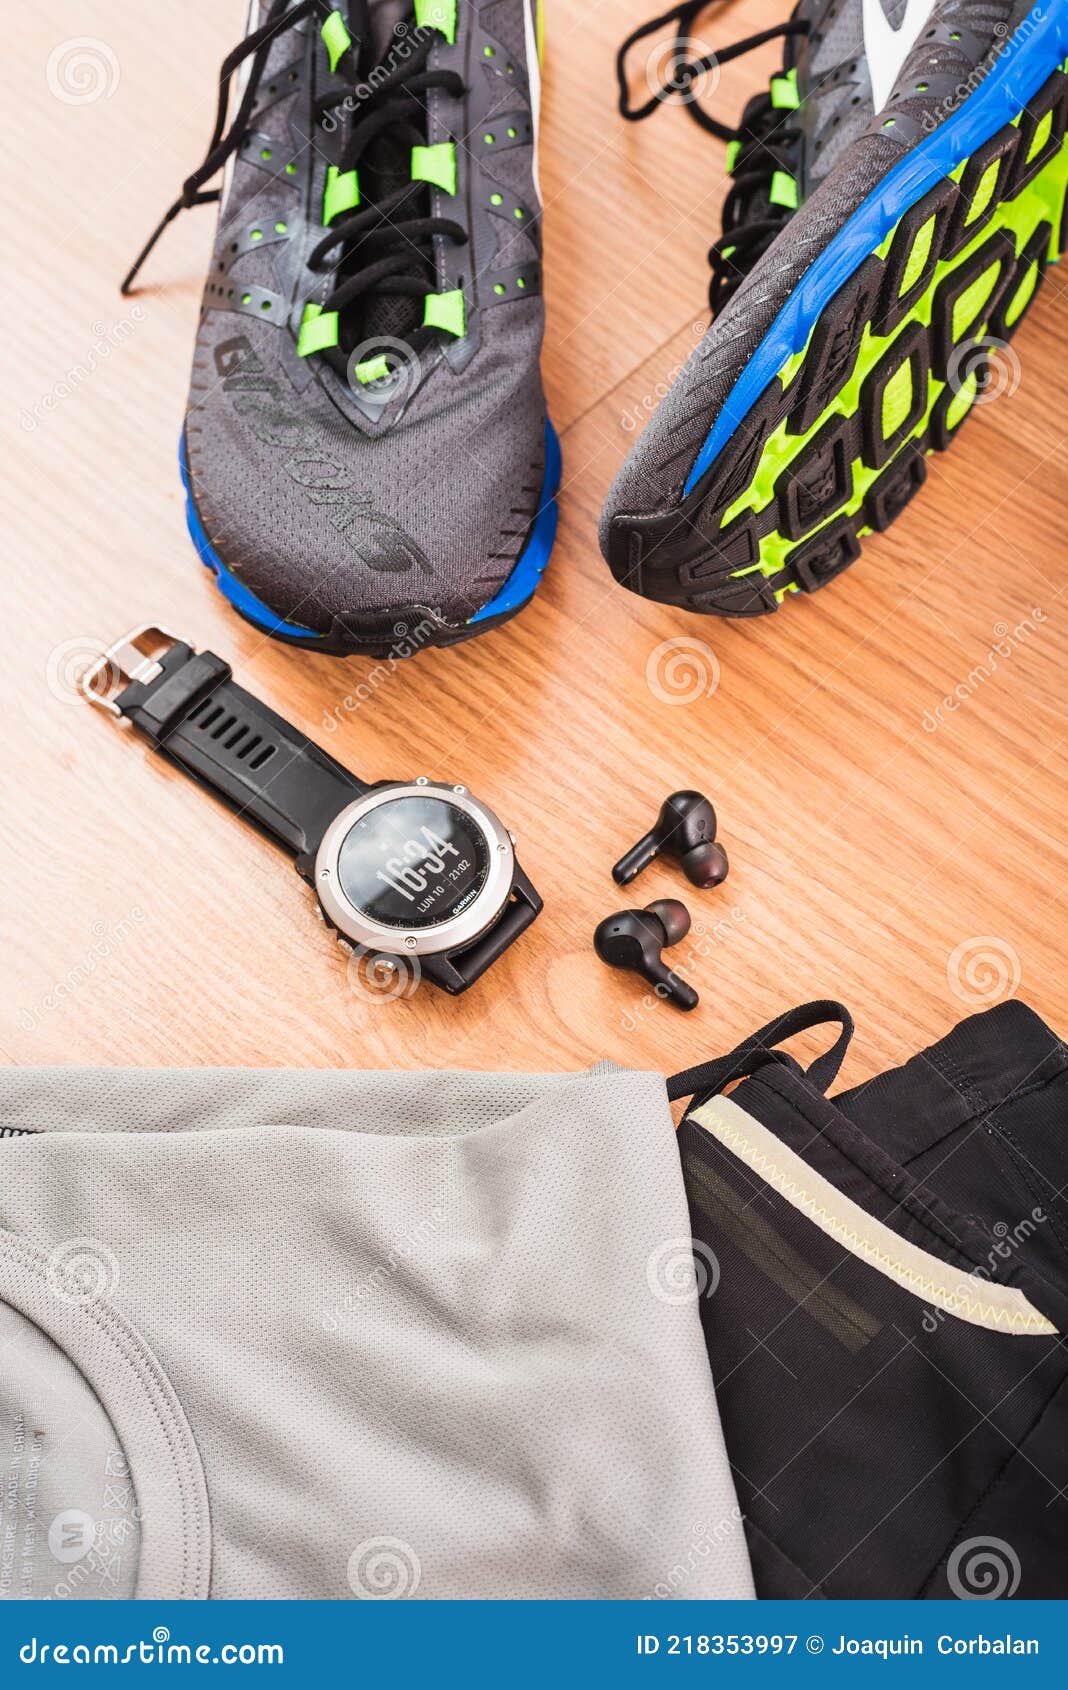 Valencia, Spain - May 9, 2021: Brooks Running Shoes and Garmin Sports Watch, Top Brands in Sports Equipment, on the Floor before Editorial of jogging, brooks: 218353997